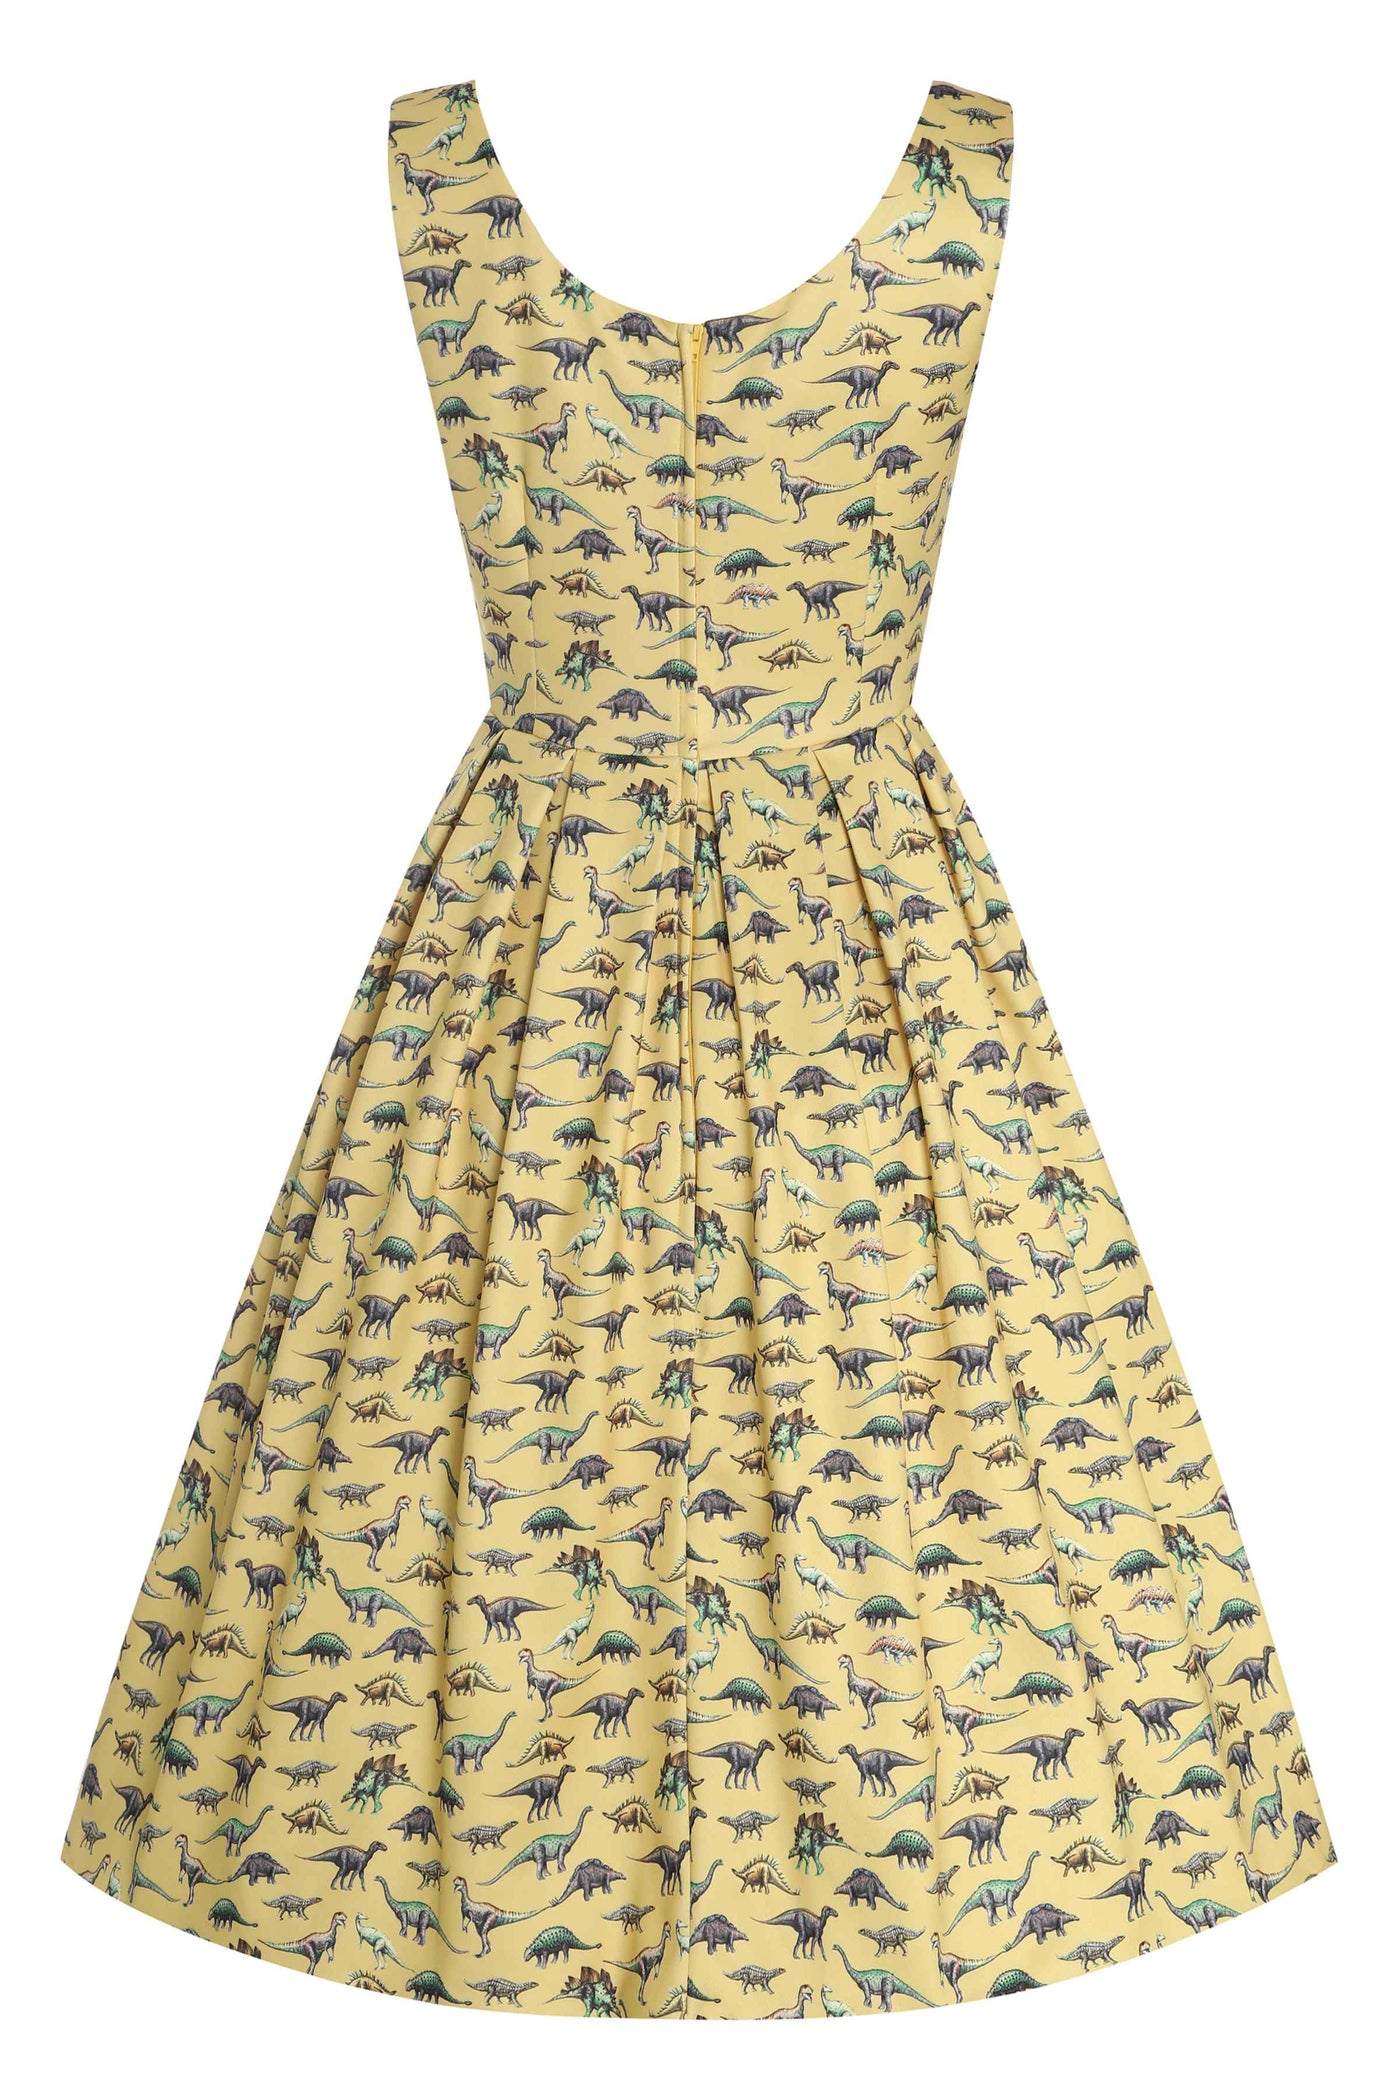 Back View of Antique Dinosaur Flared Dress in Yellow